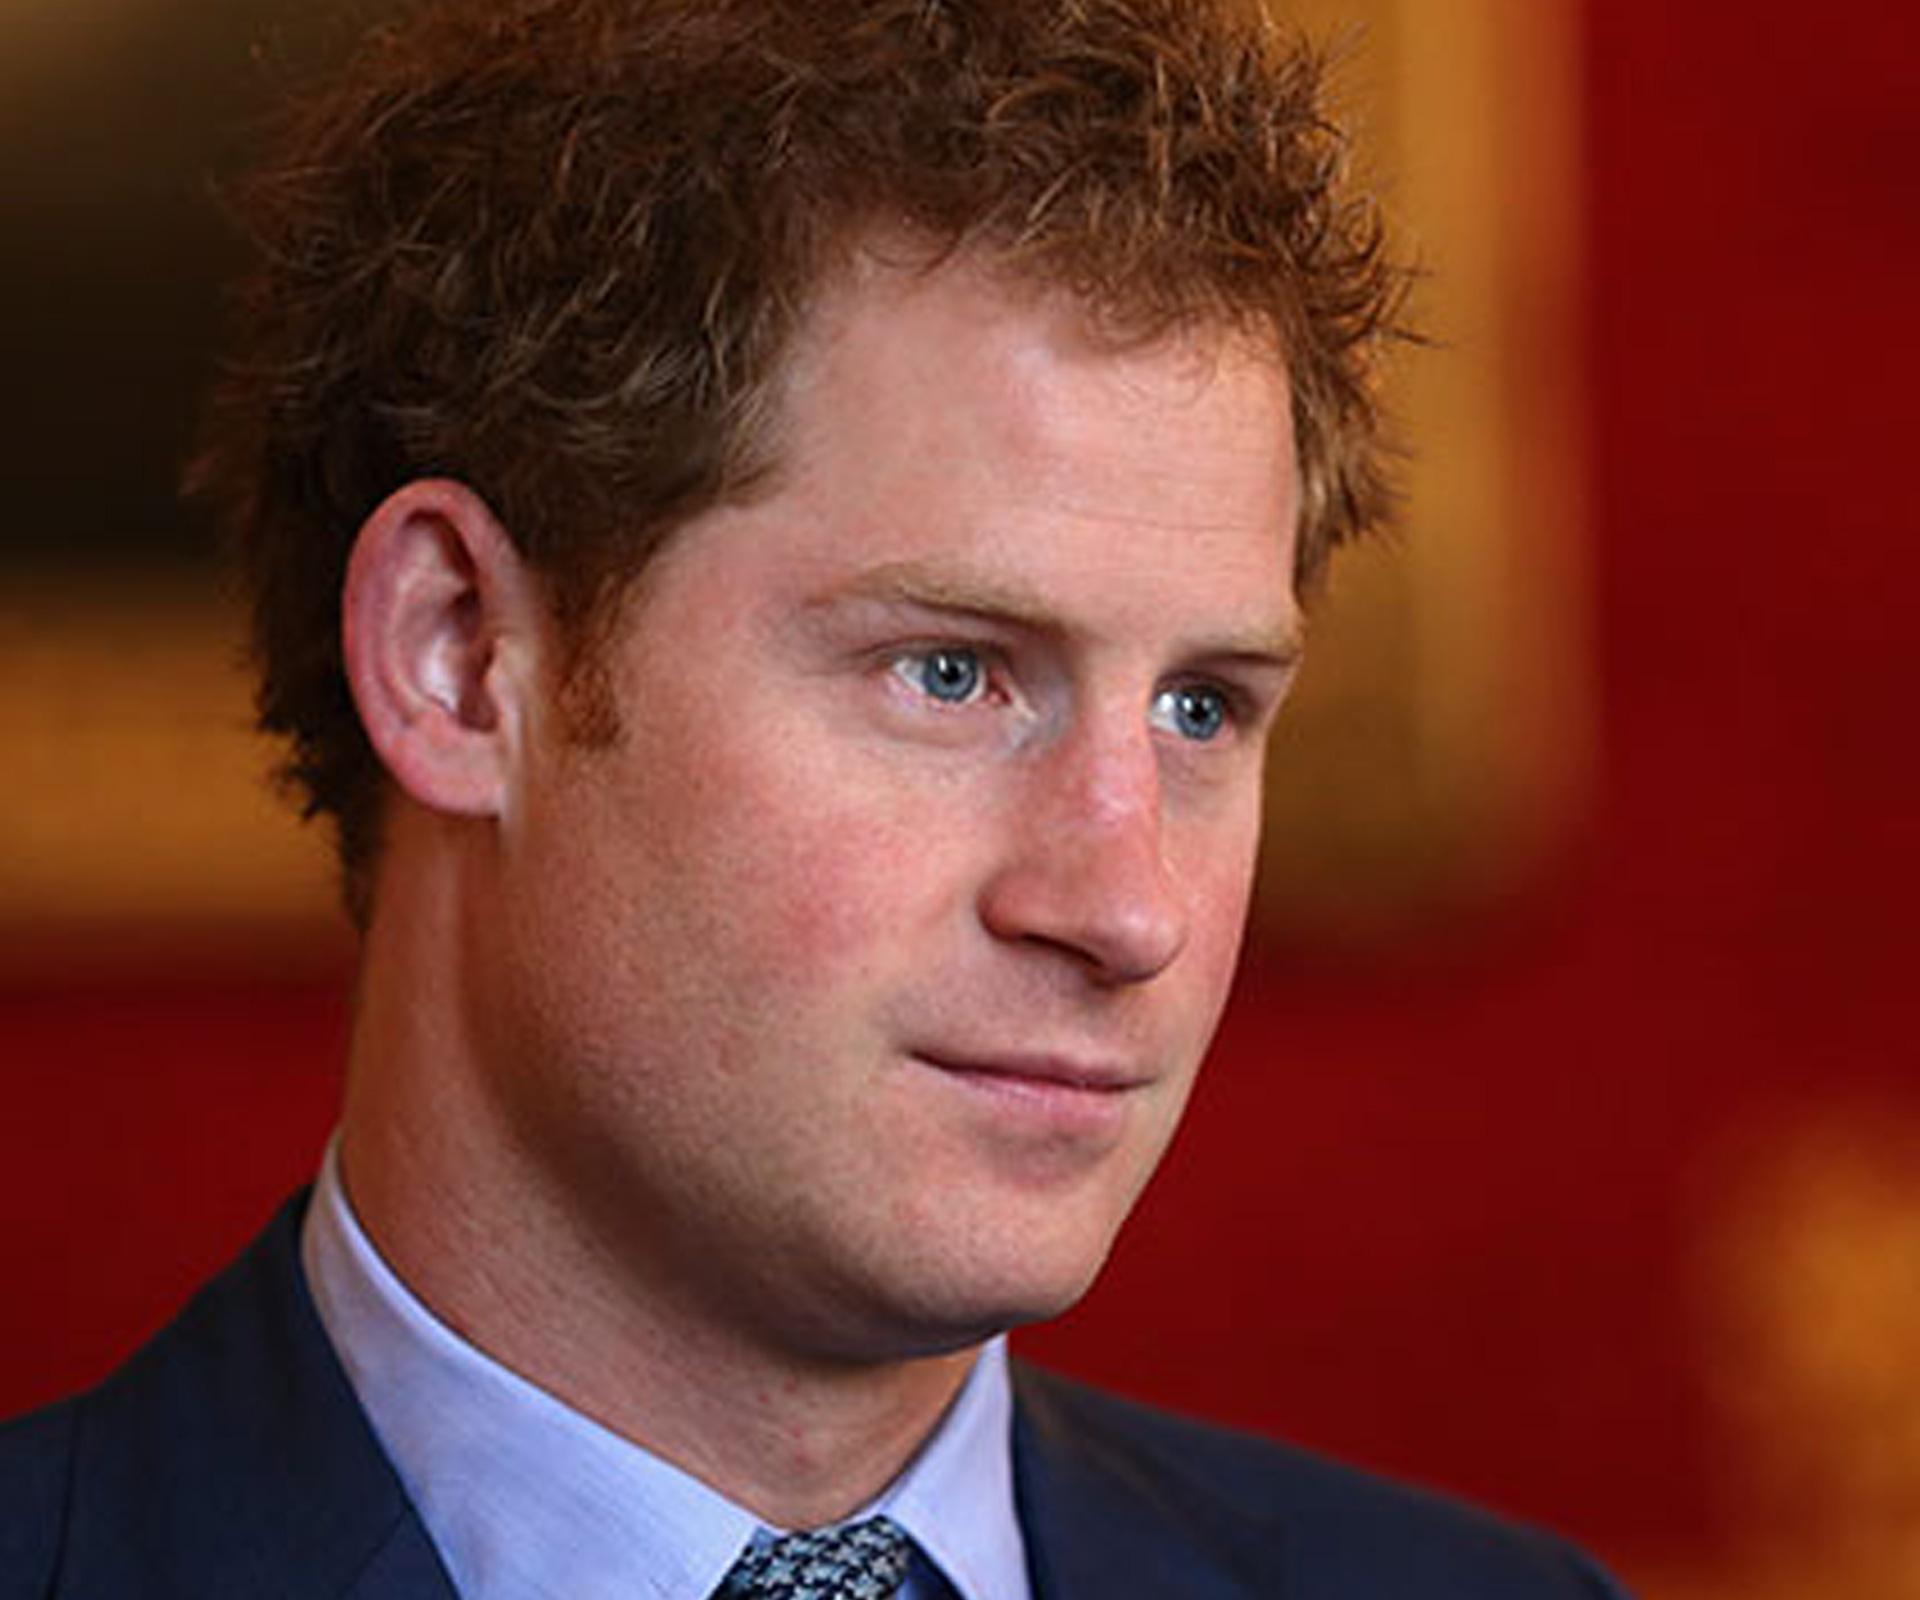 Prince Harry will miss the royal birth